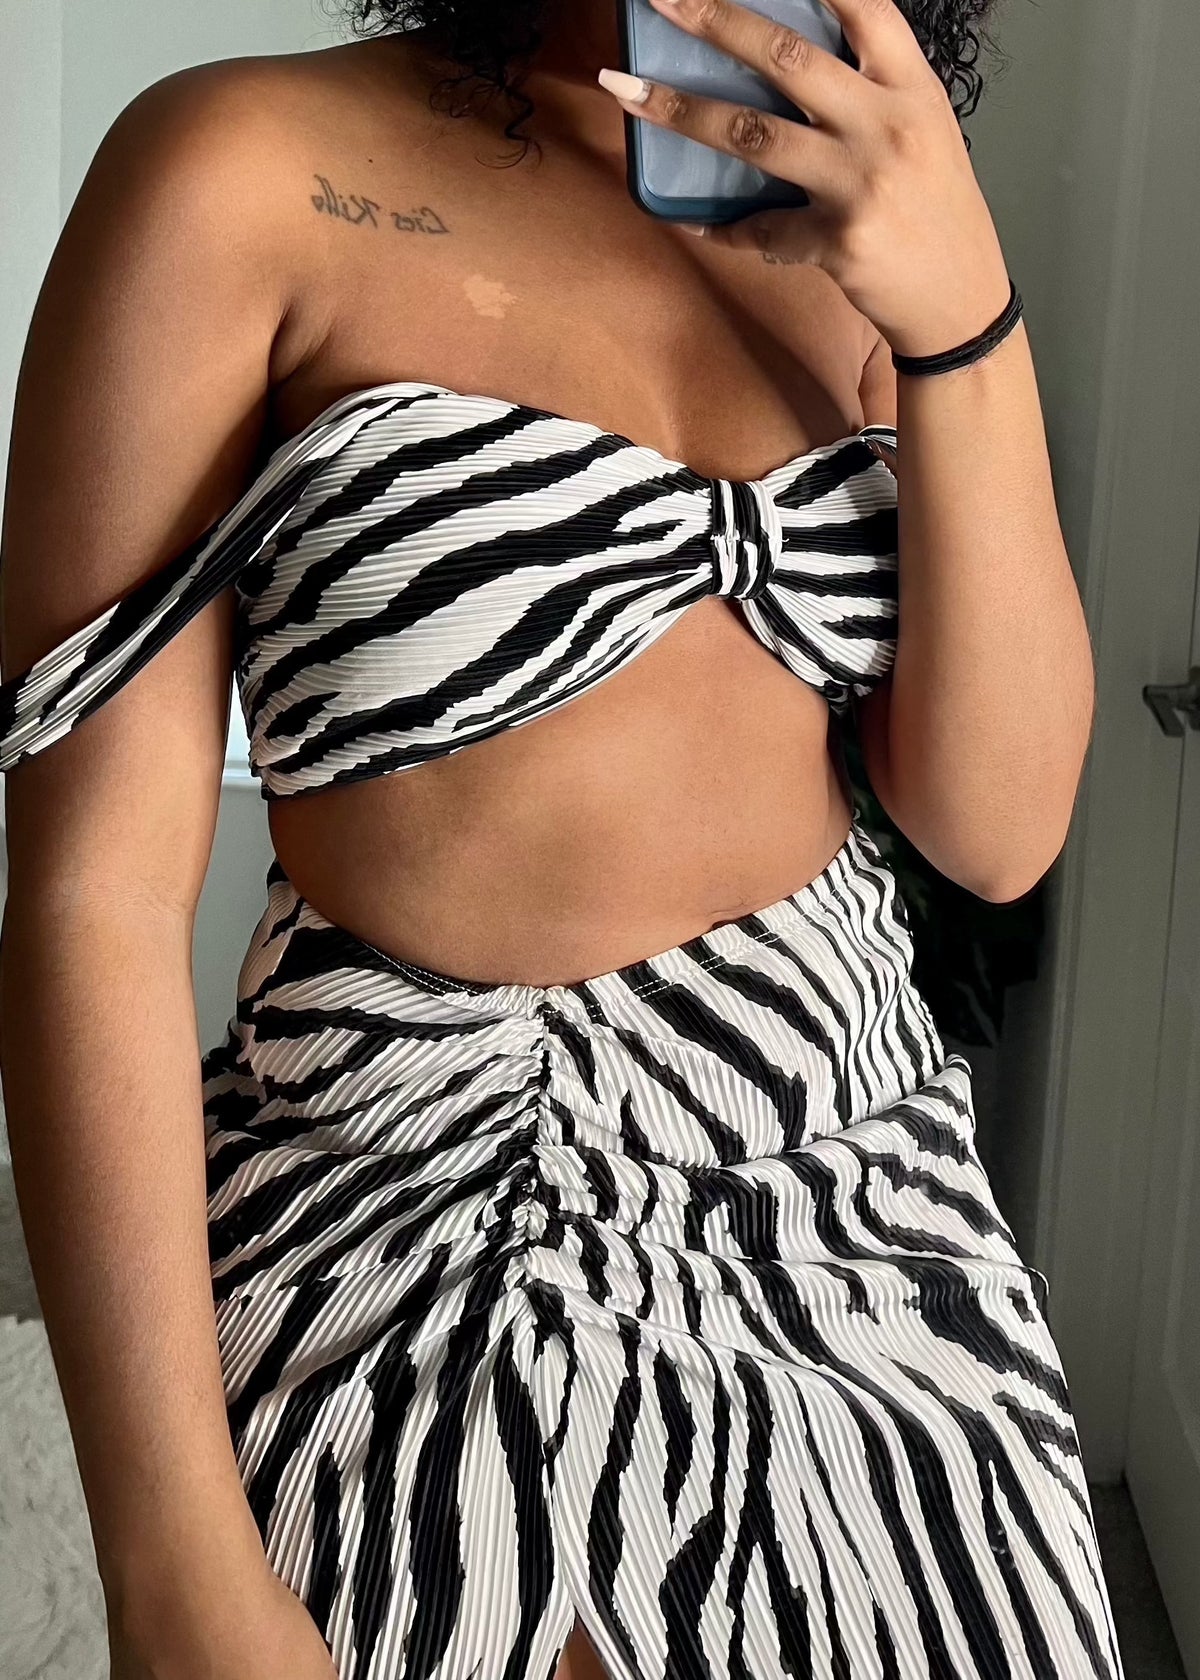 Get trendy with Black & White Zebra Skirt Set - Sets available at ELLE TENAJ. Grab yours for $54.9 today!